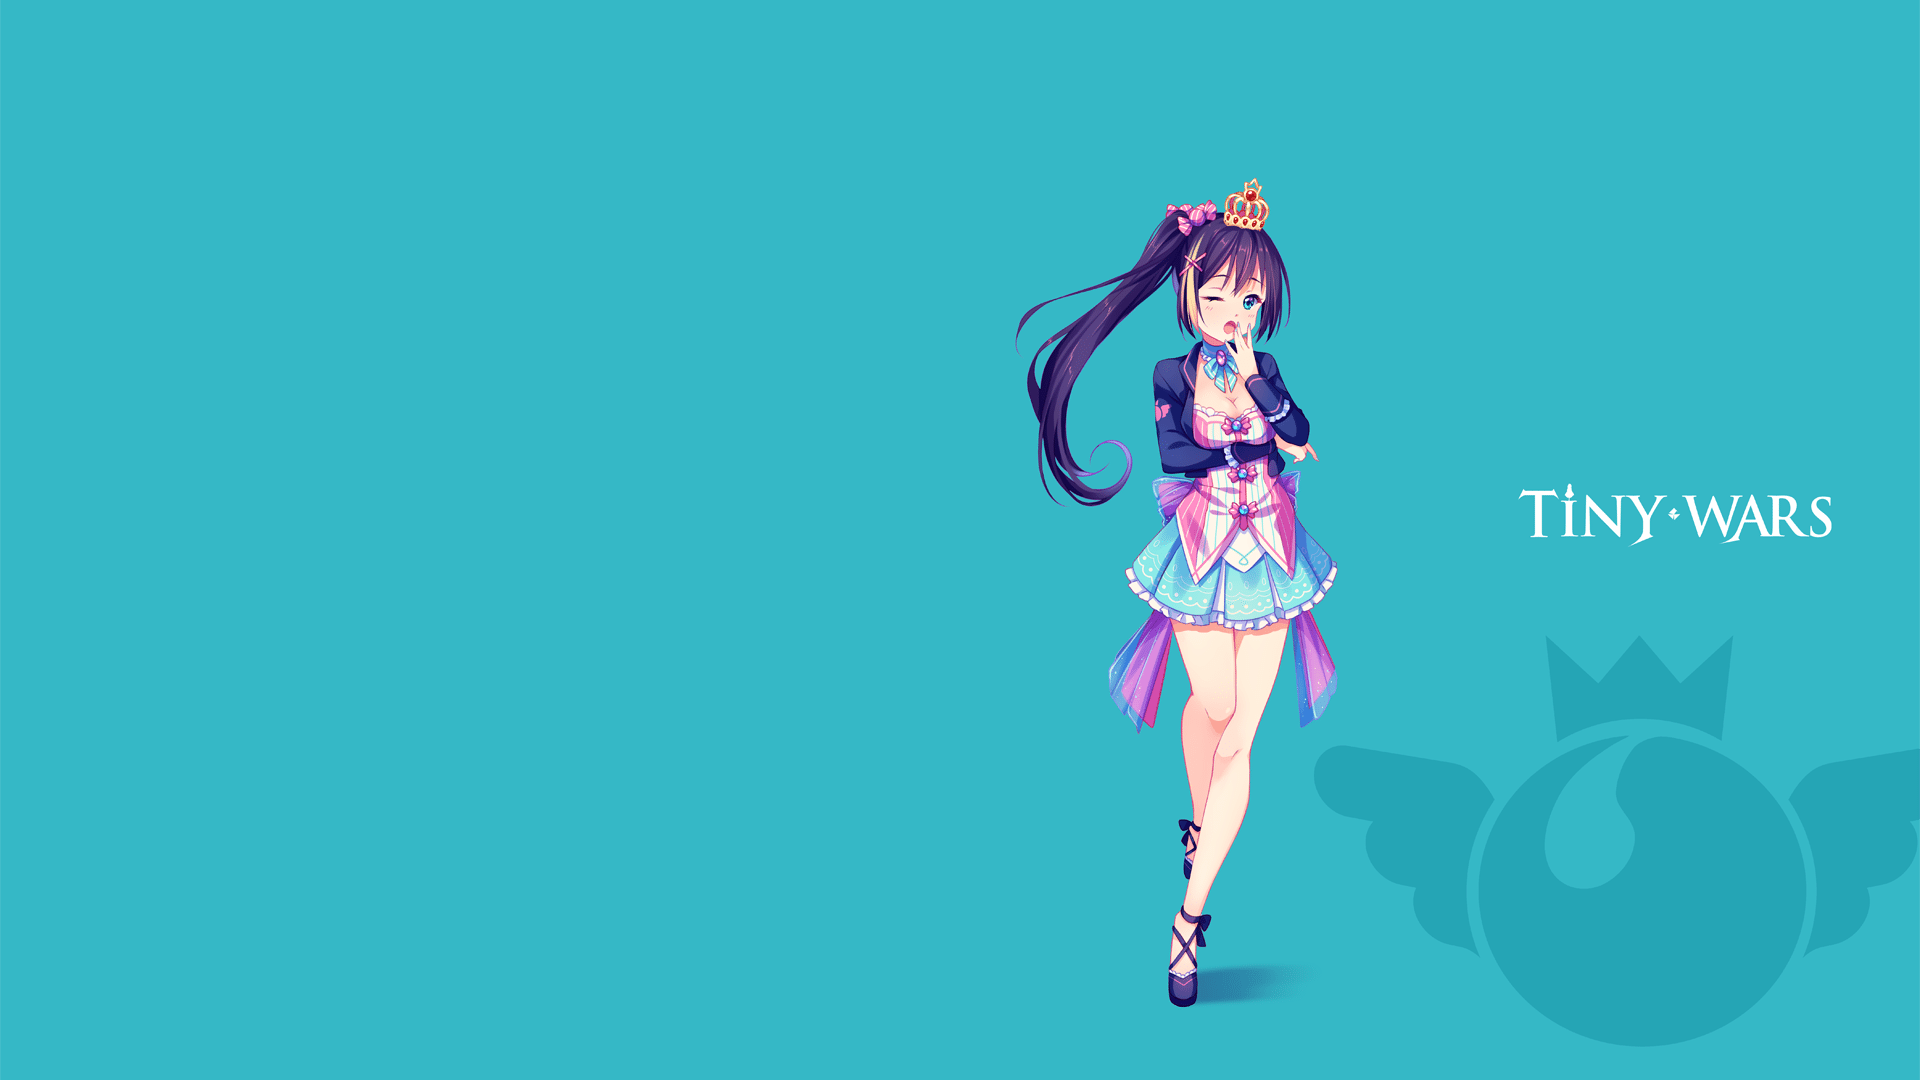 Anime Candy Girl From TinyWars (1920x1080), HQ Background. HD wallpaper Gallery. Gallsource.com. Geo wallpaper, Wallpaper, Wallpaper maker